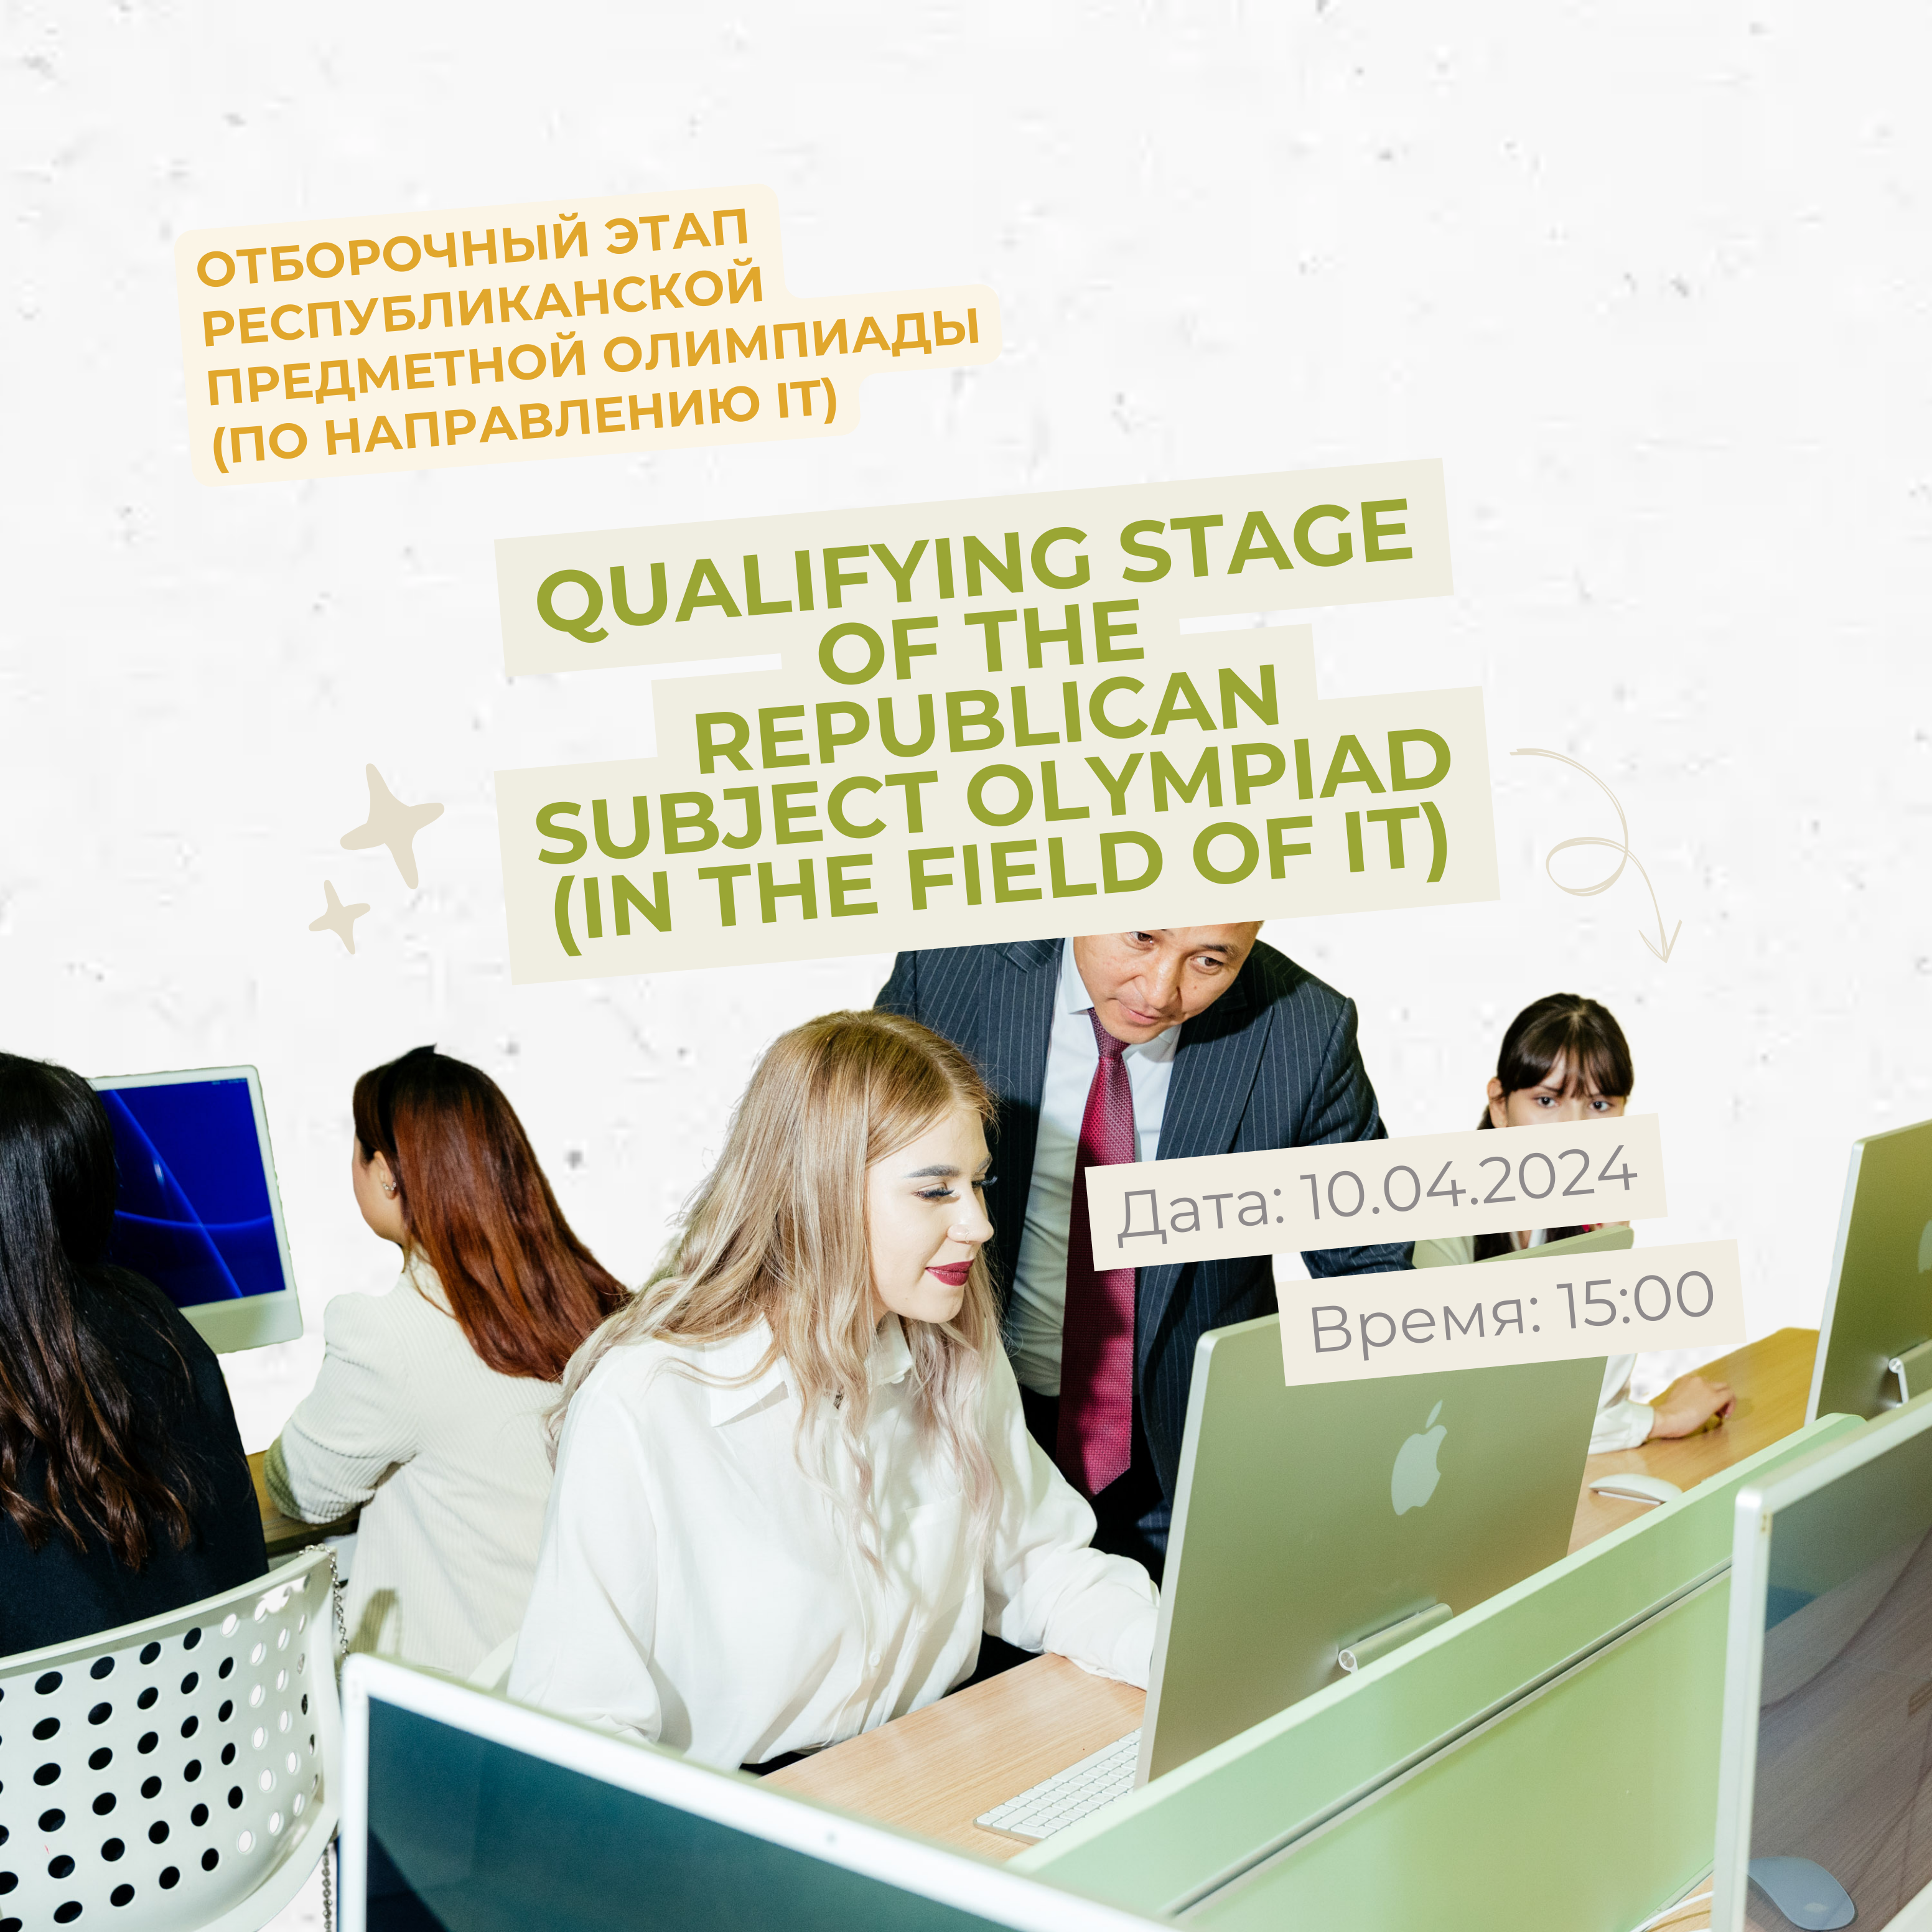 The qualifying stage of the Republican subject Olympiad in the field of IT is announced